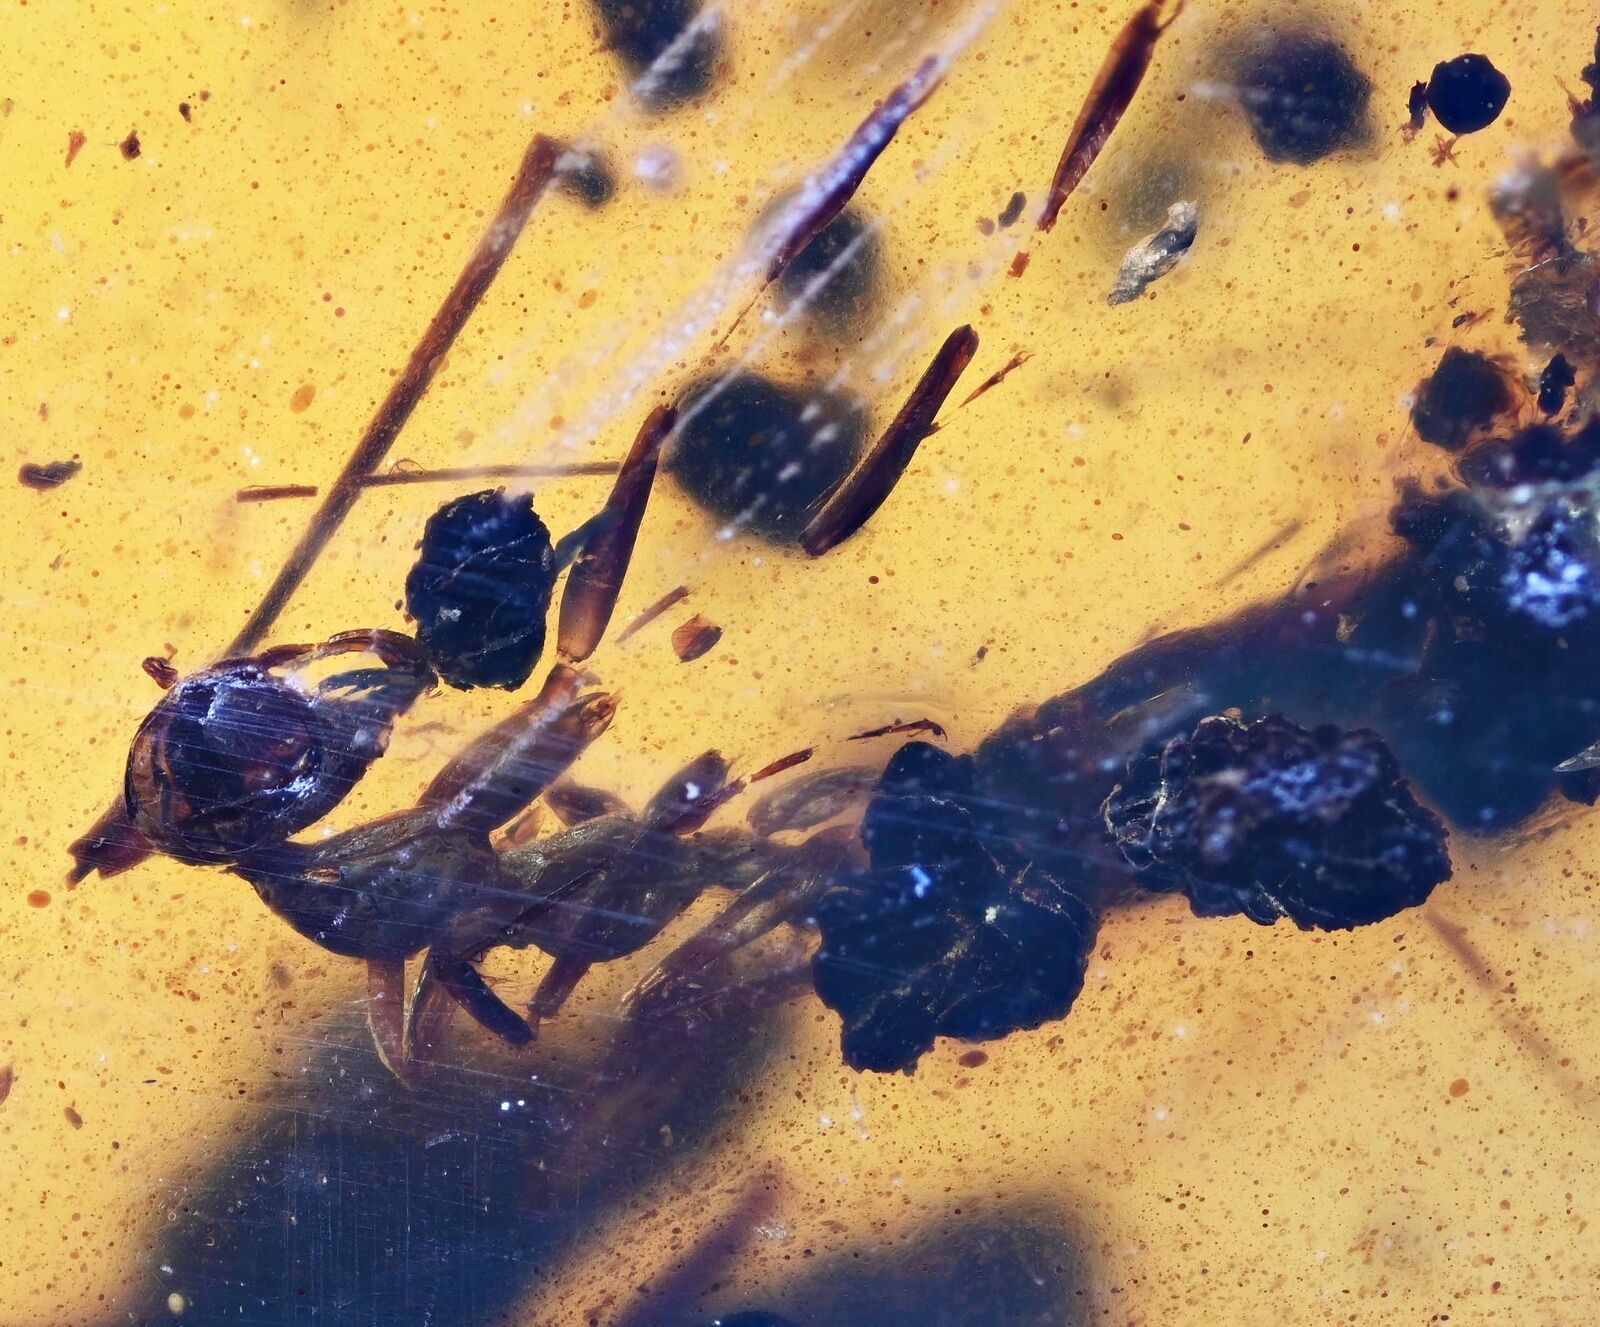 RARE Haidomyrmex (Hell Ant), Fossil inclusion in Burmese Amber